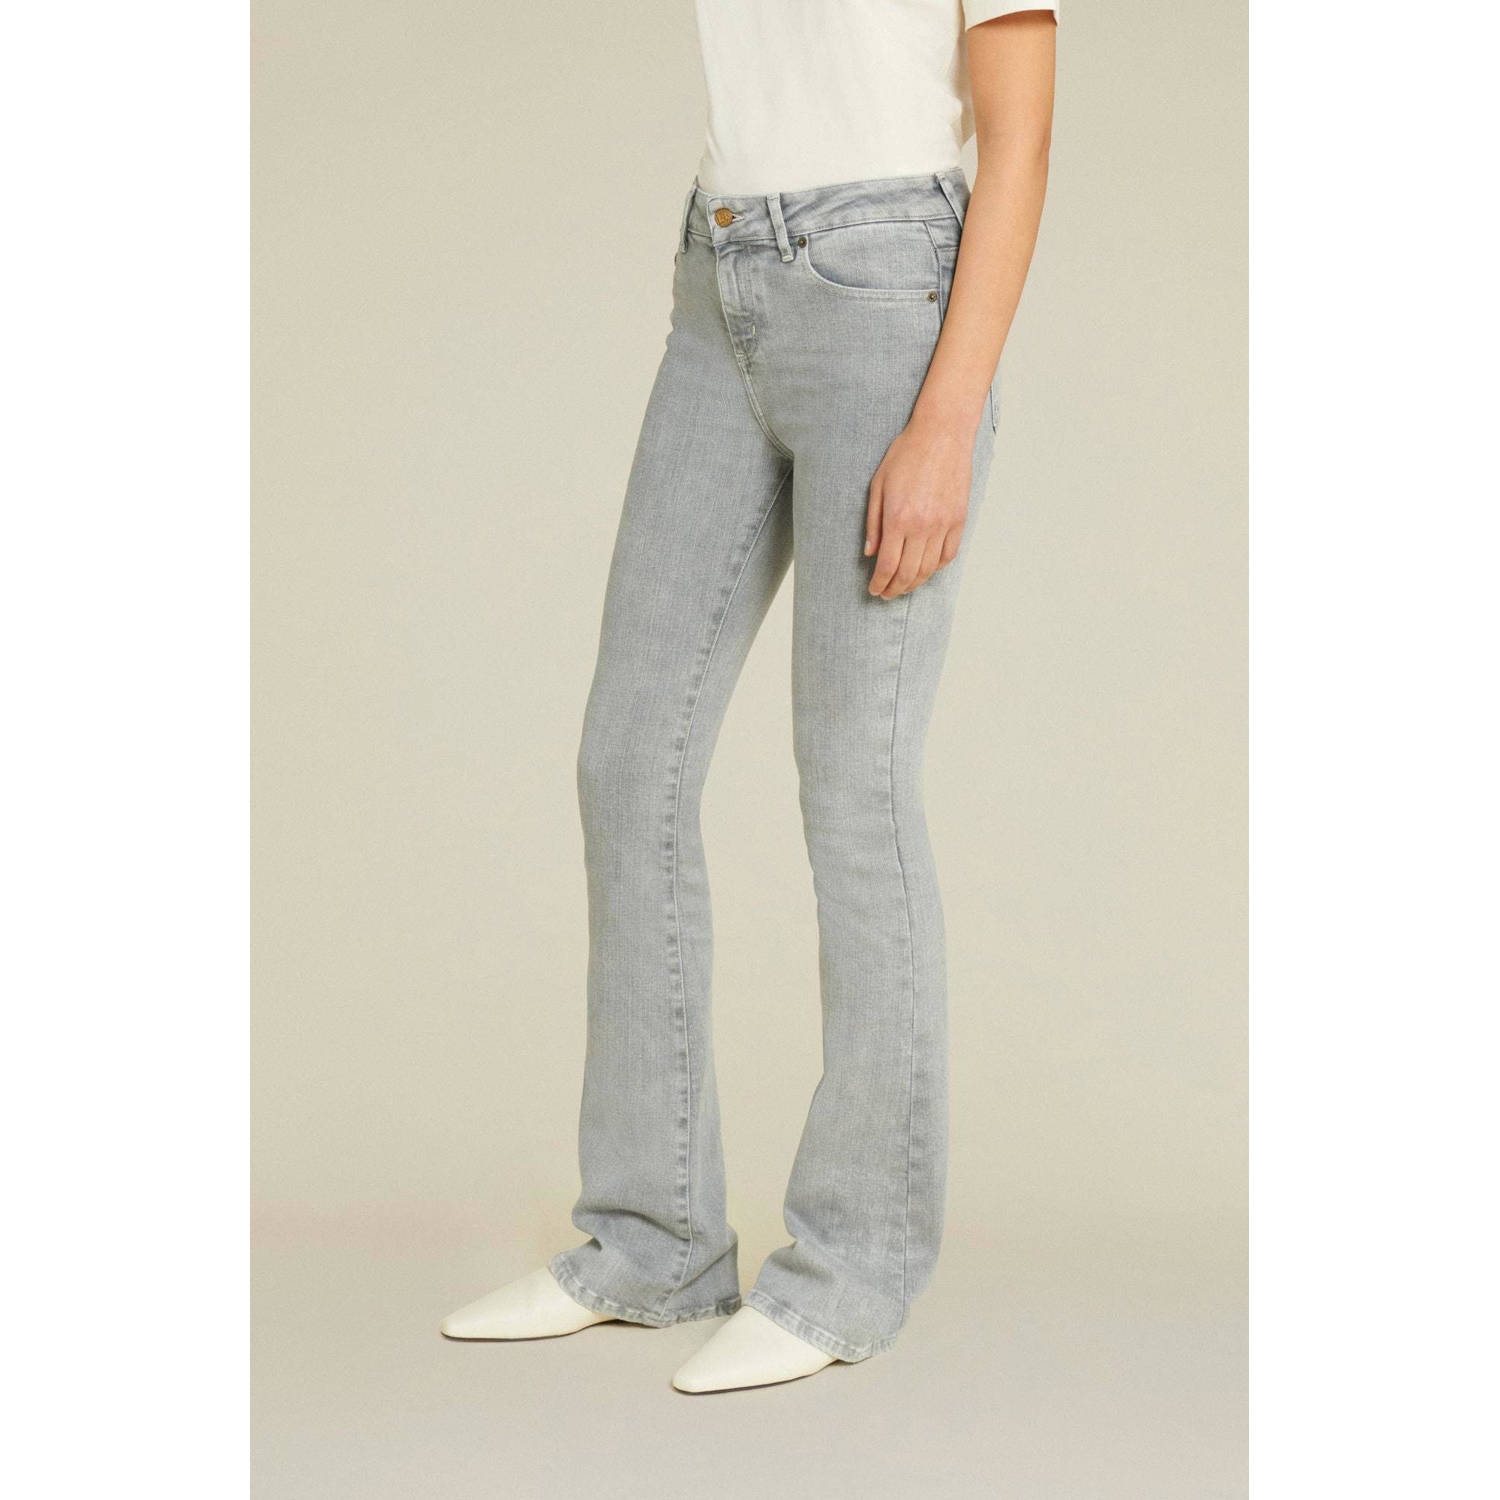 Lois flared jeans Raval 16 grey stone